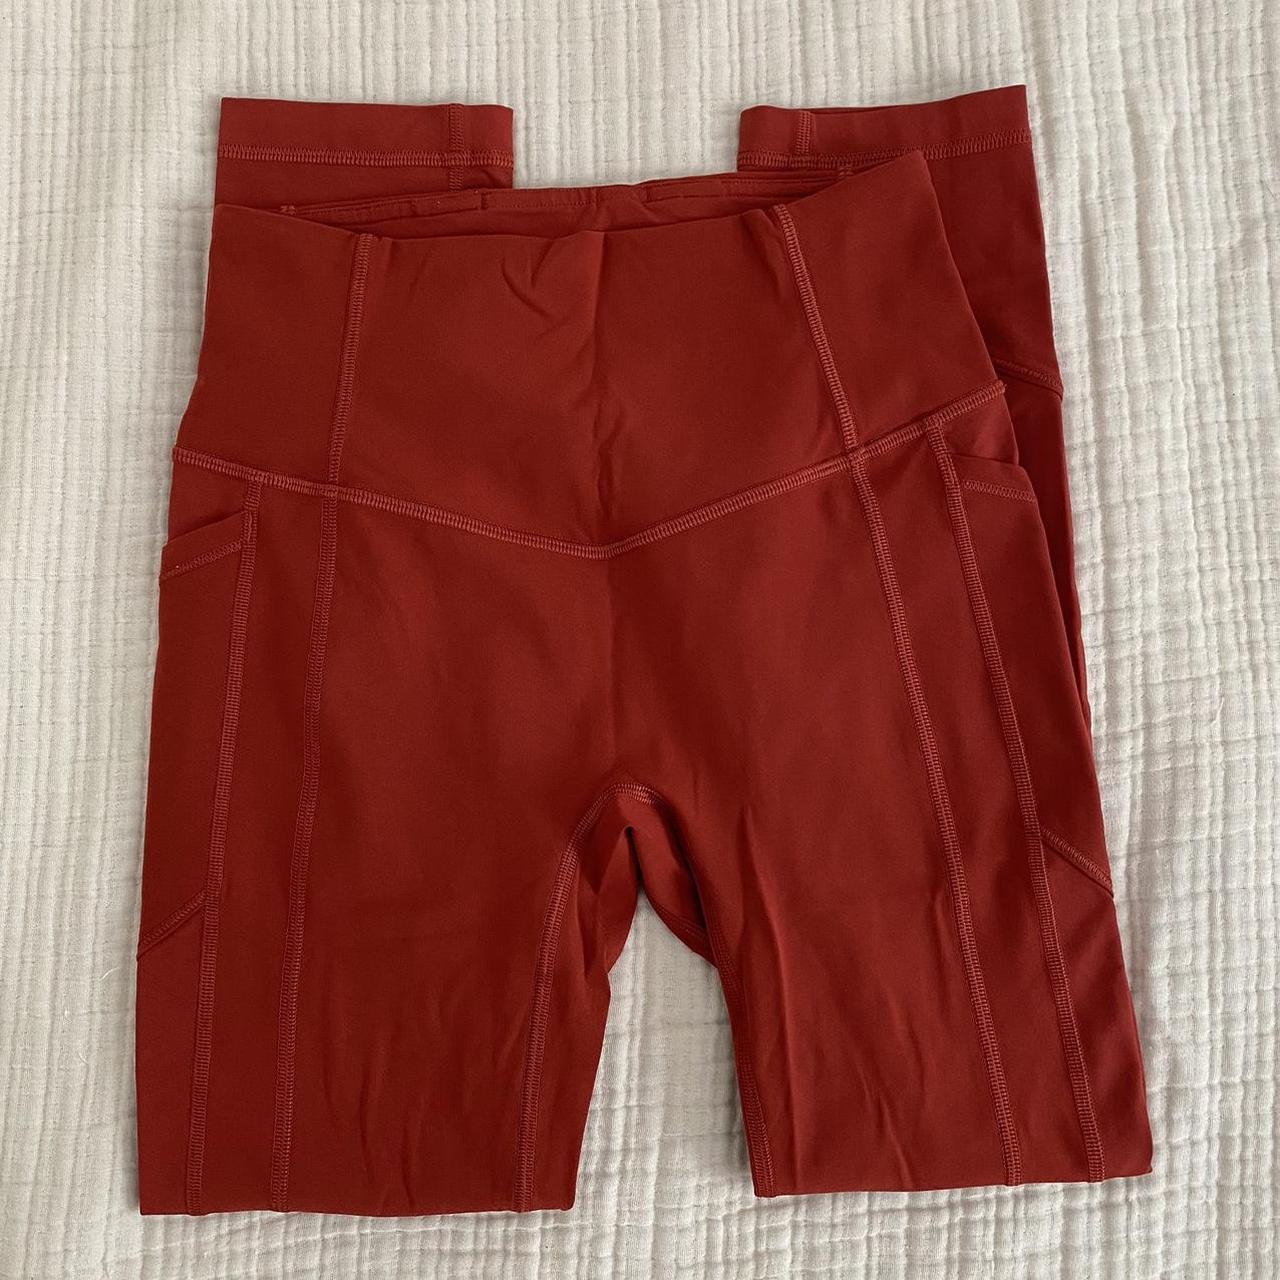 Lululemon All The Right Places Leggings In Cayenne - Depop